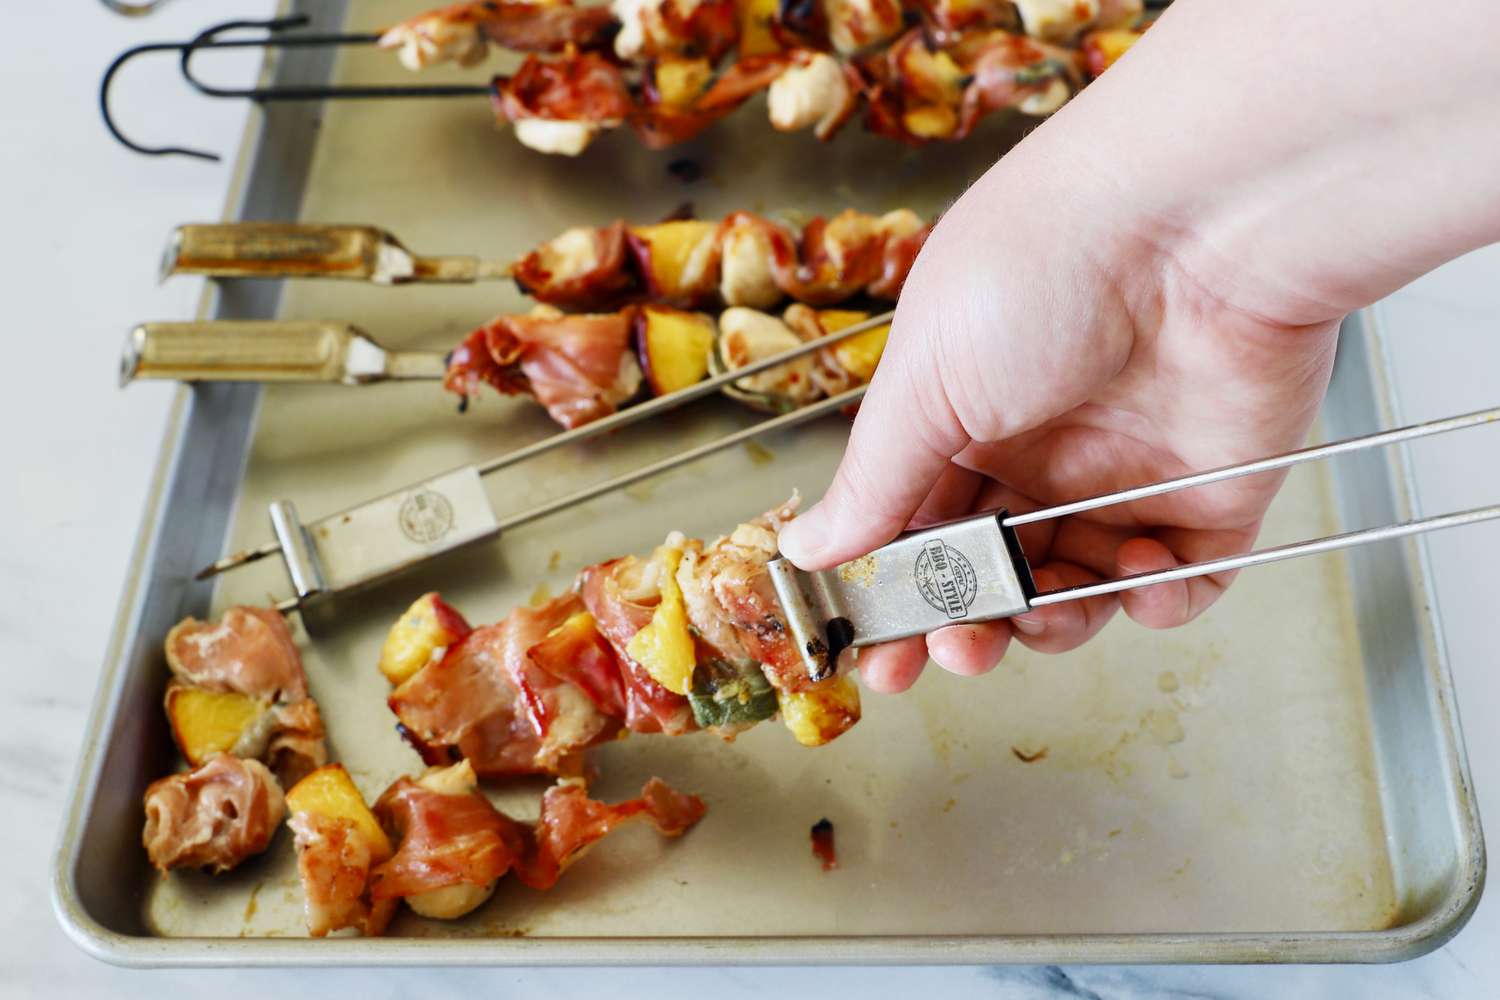 a closeup look at a hand removing food from a skewer